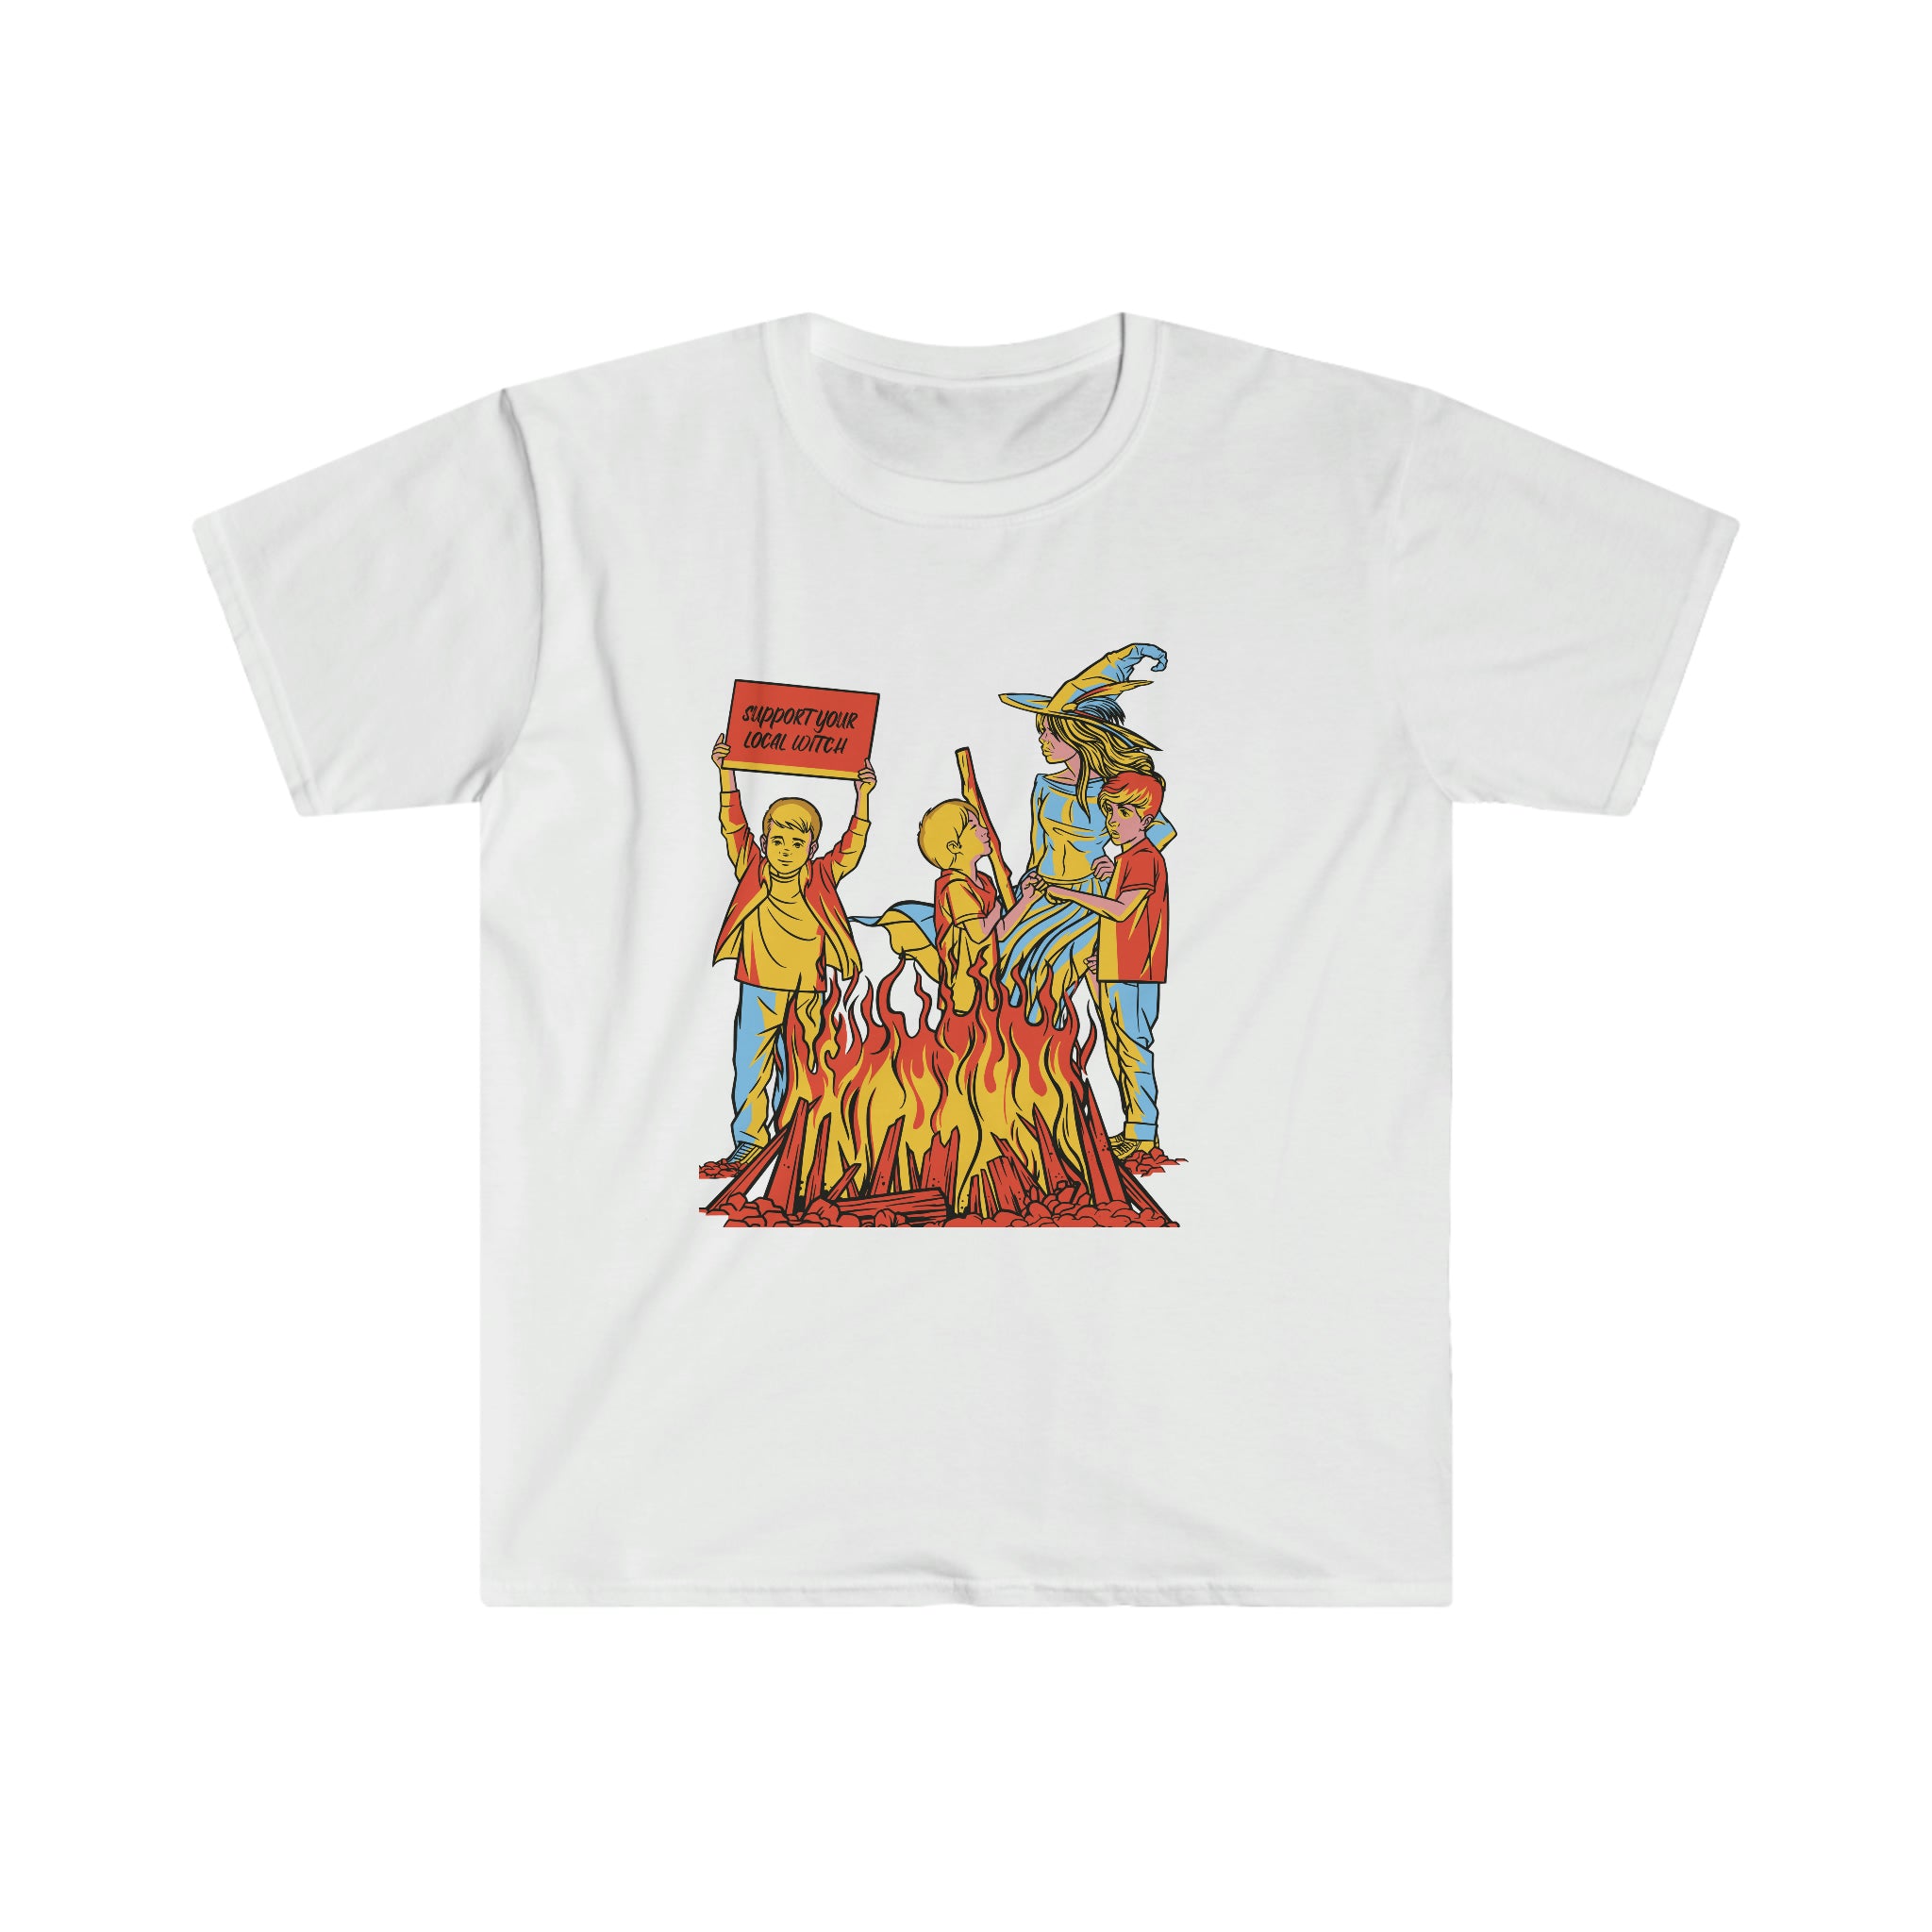 We Love Witches T-Shirt